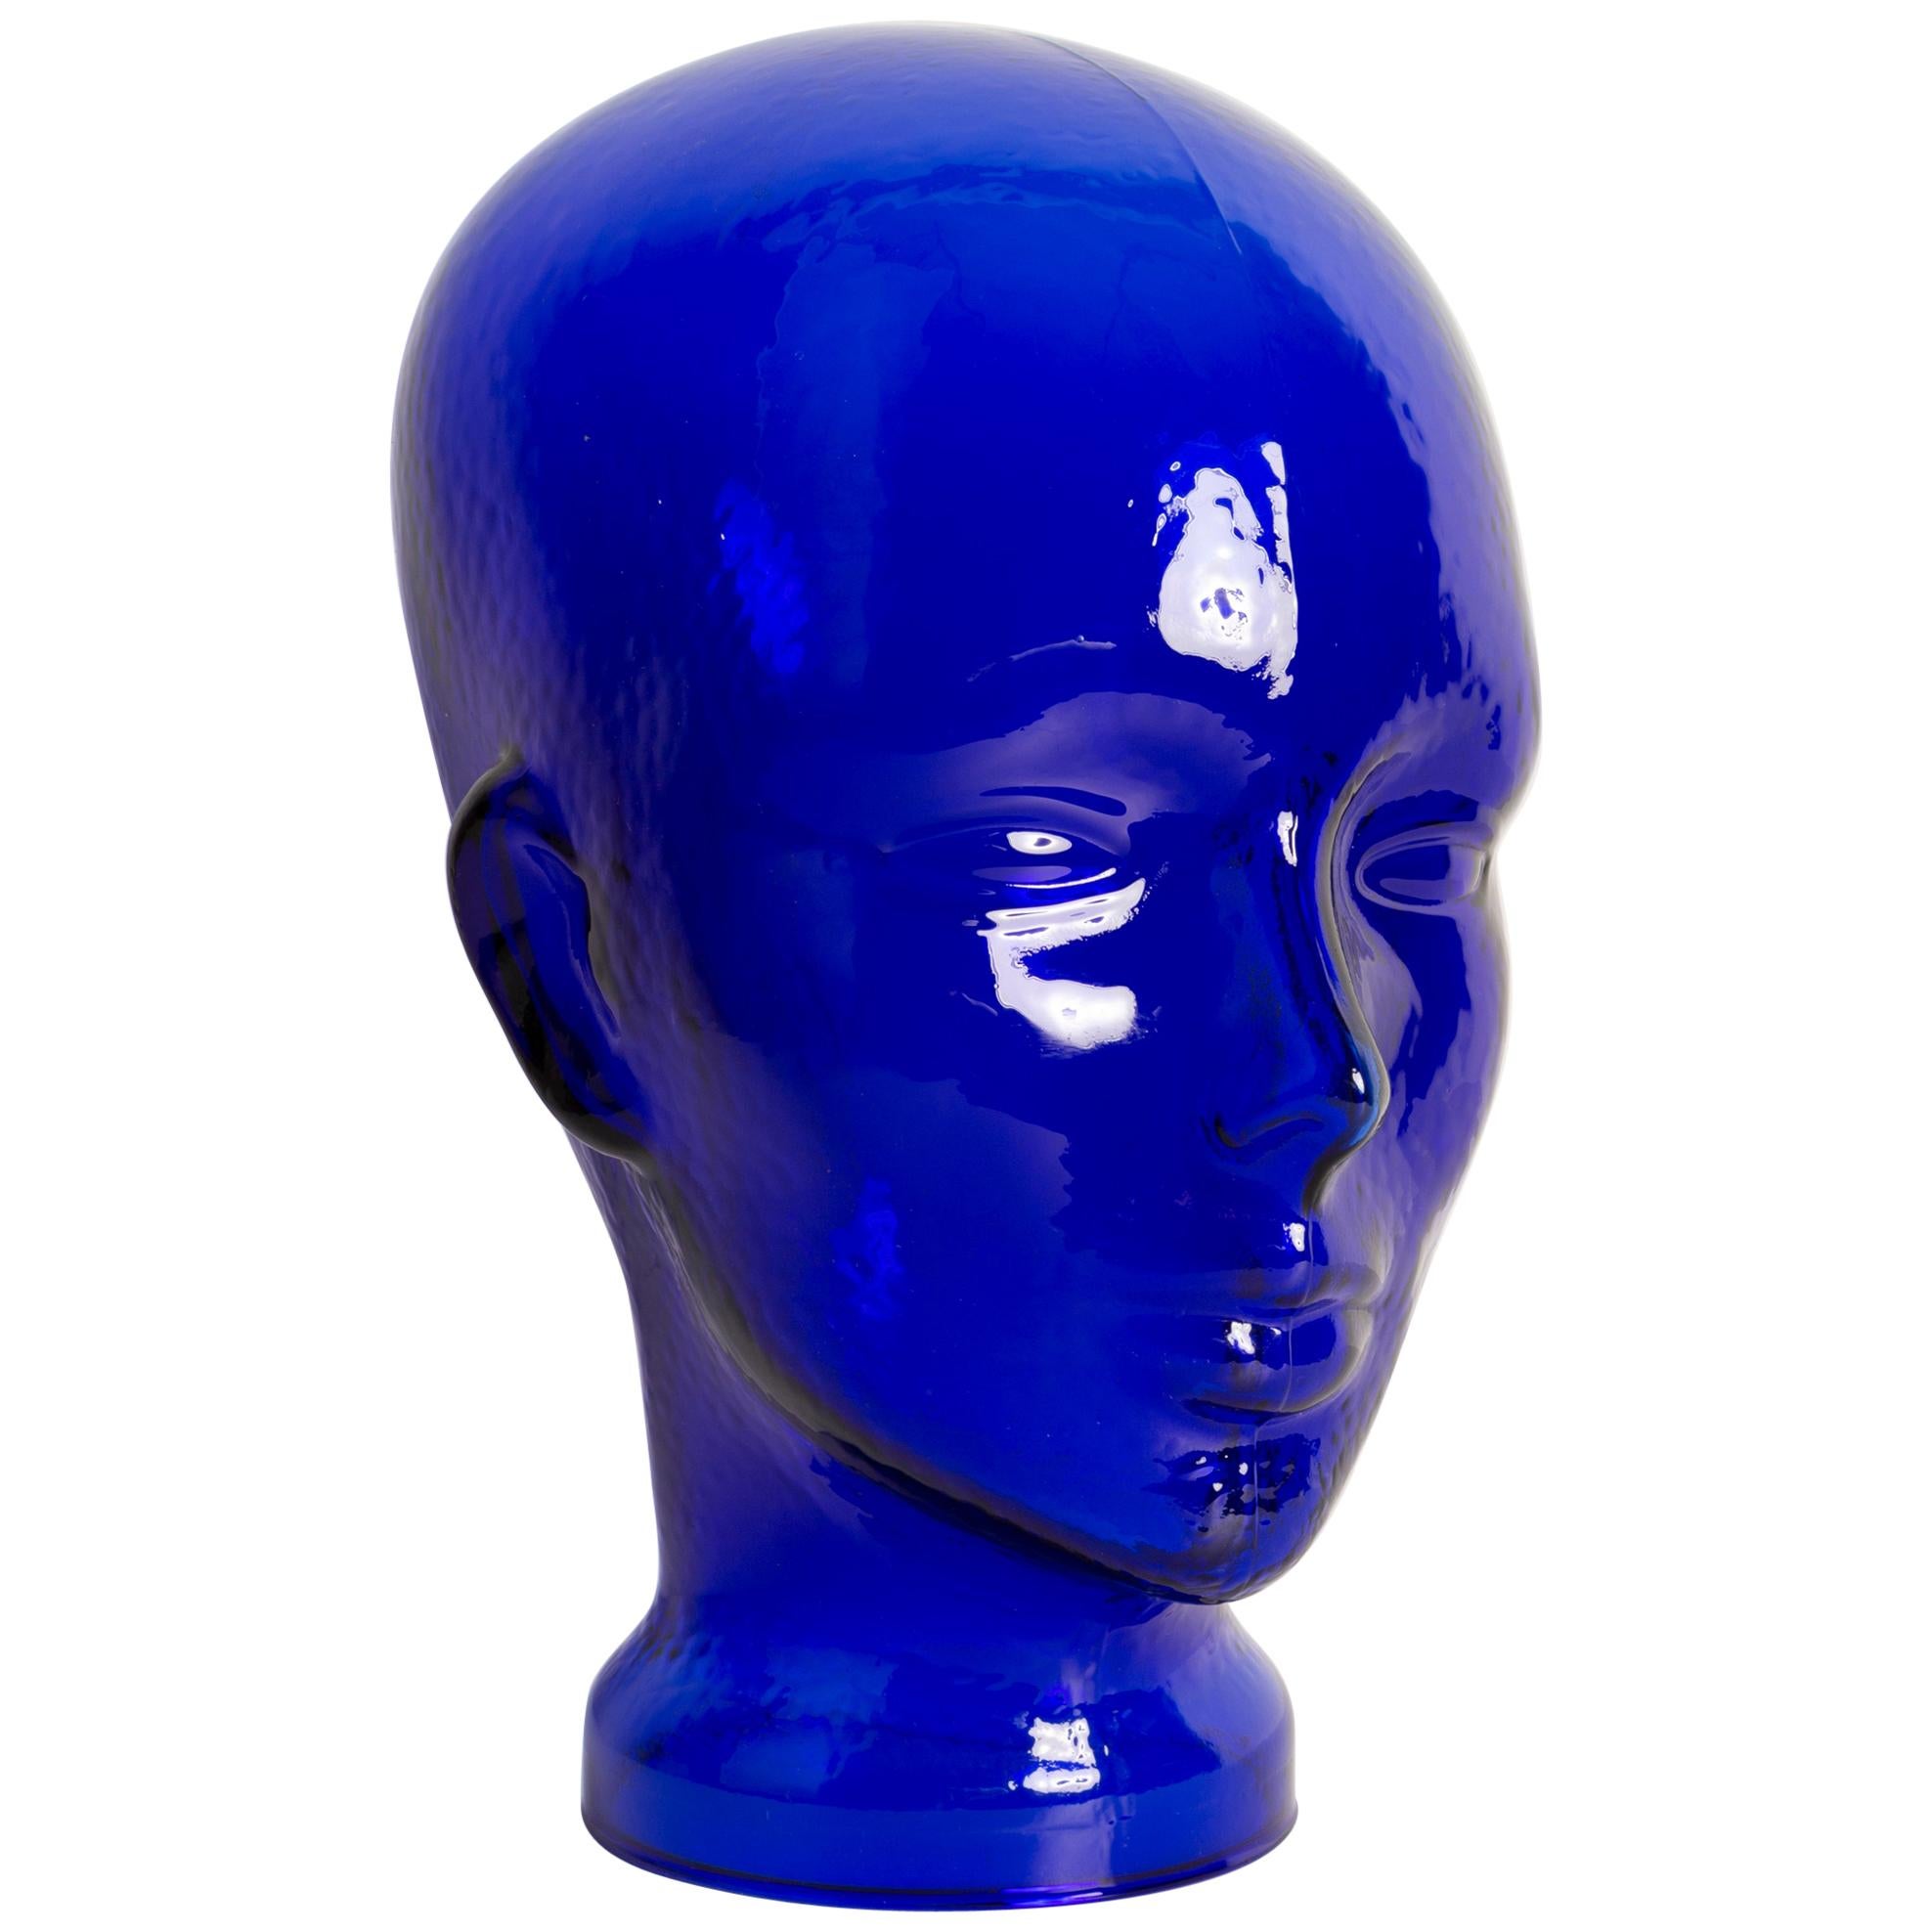 Pink Vintage Decorative Mannequin Glass Head Sculpture, 1970s, Germany For  Sale at 1stDibs